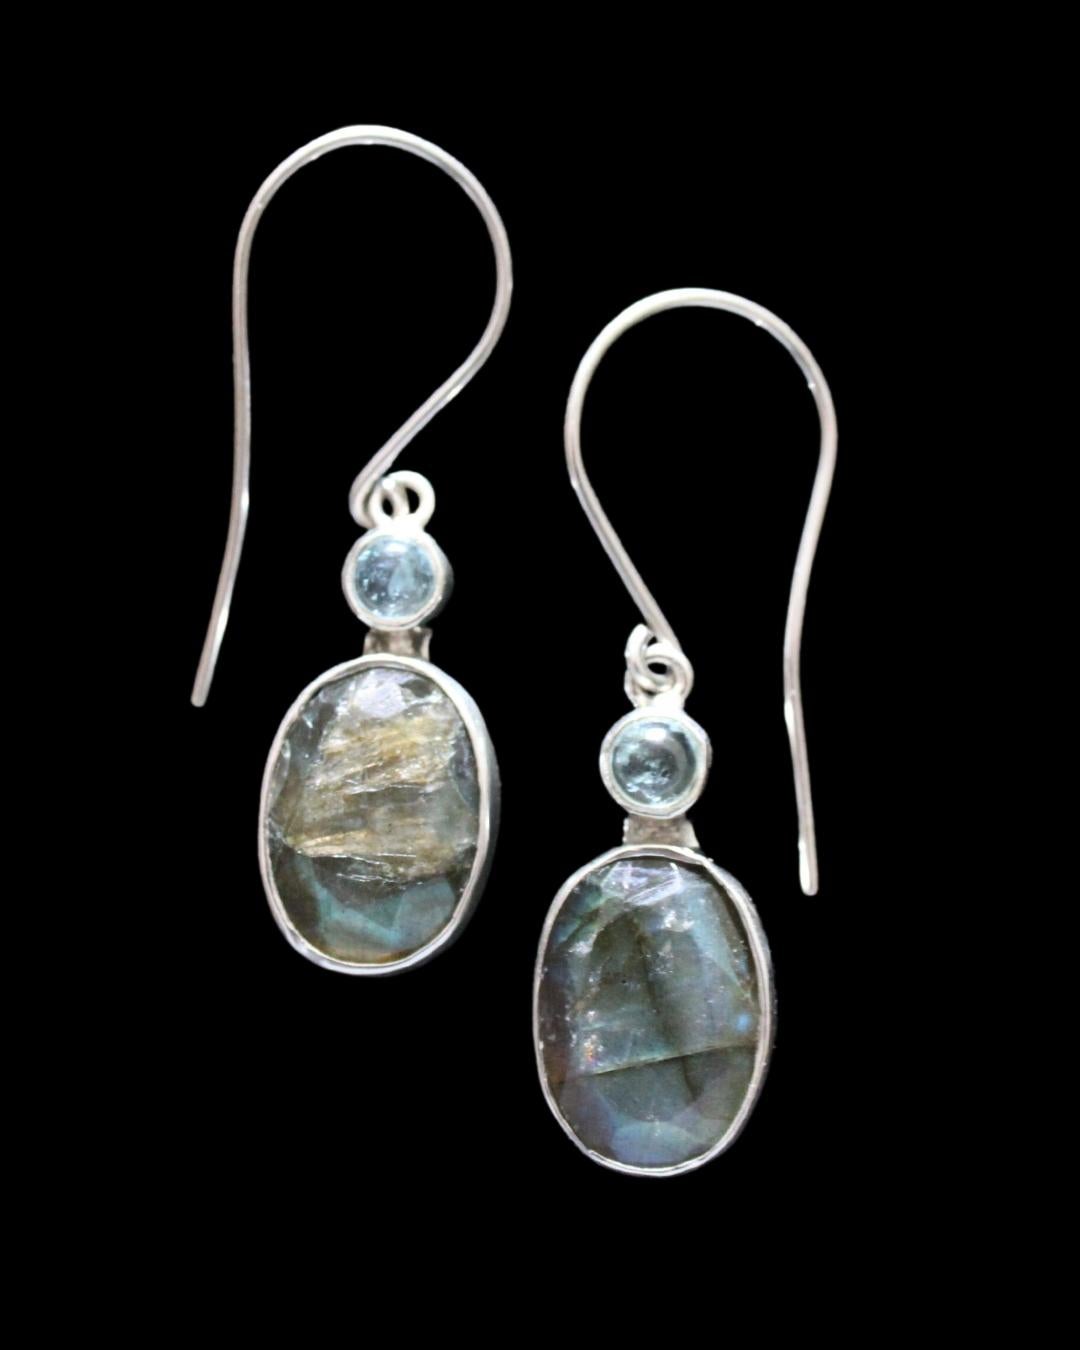 Contemporary Sterling Silver Labradorite & Aquamarine Earrings  In Excellent Condition For Sale In Arcata, CA